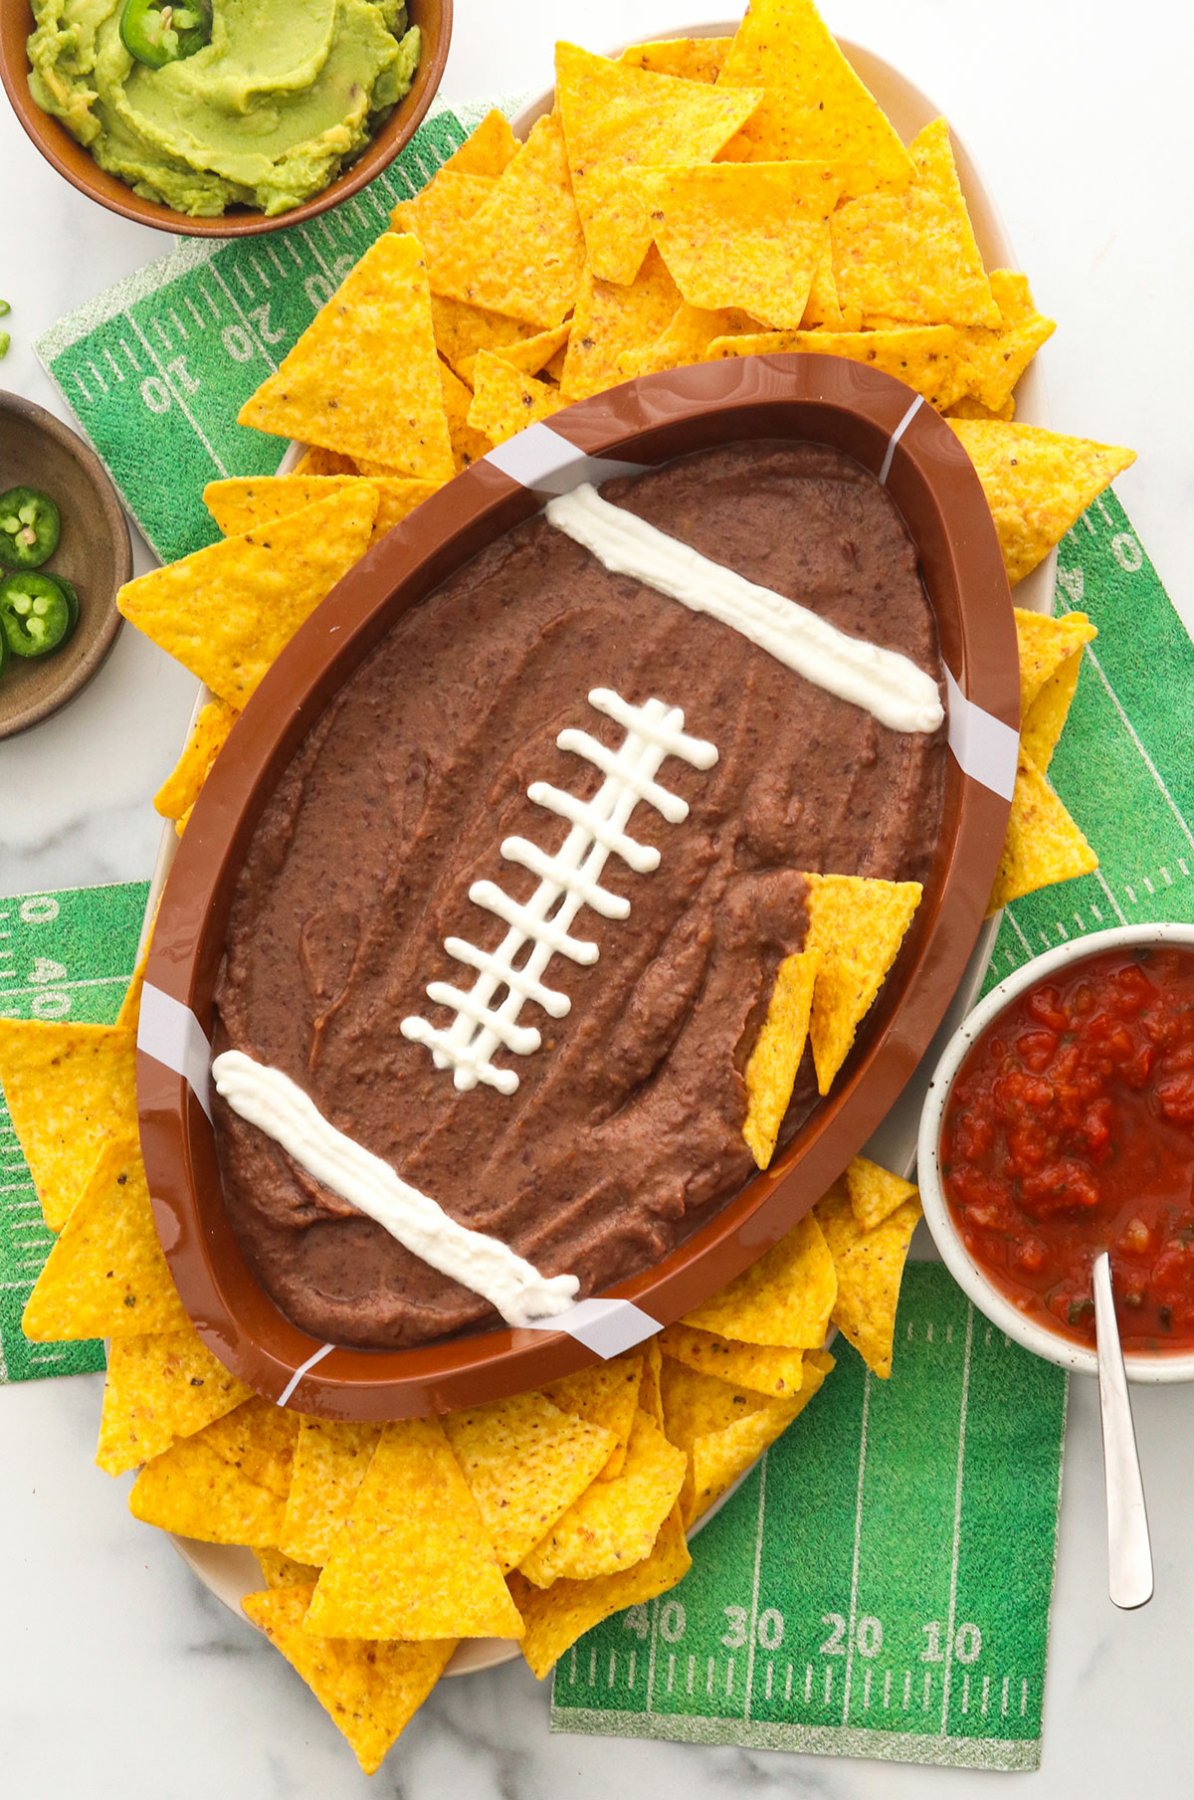 Black bean dip in a football shaped bowl with tortilla chips.